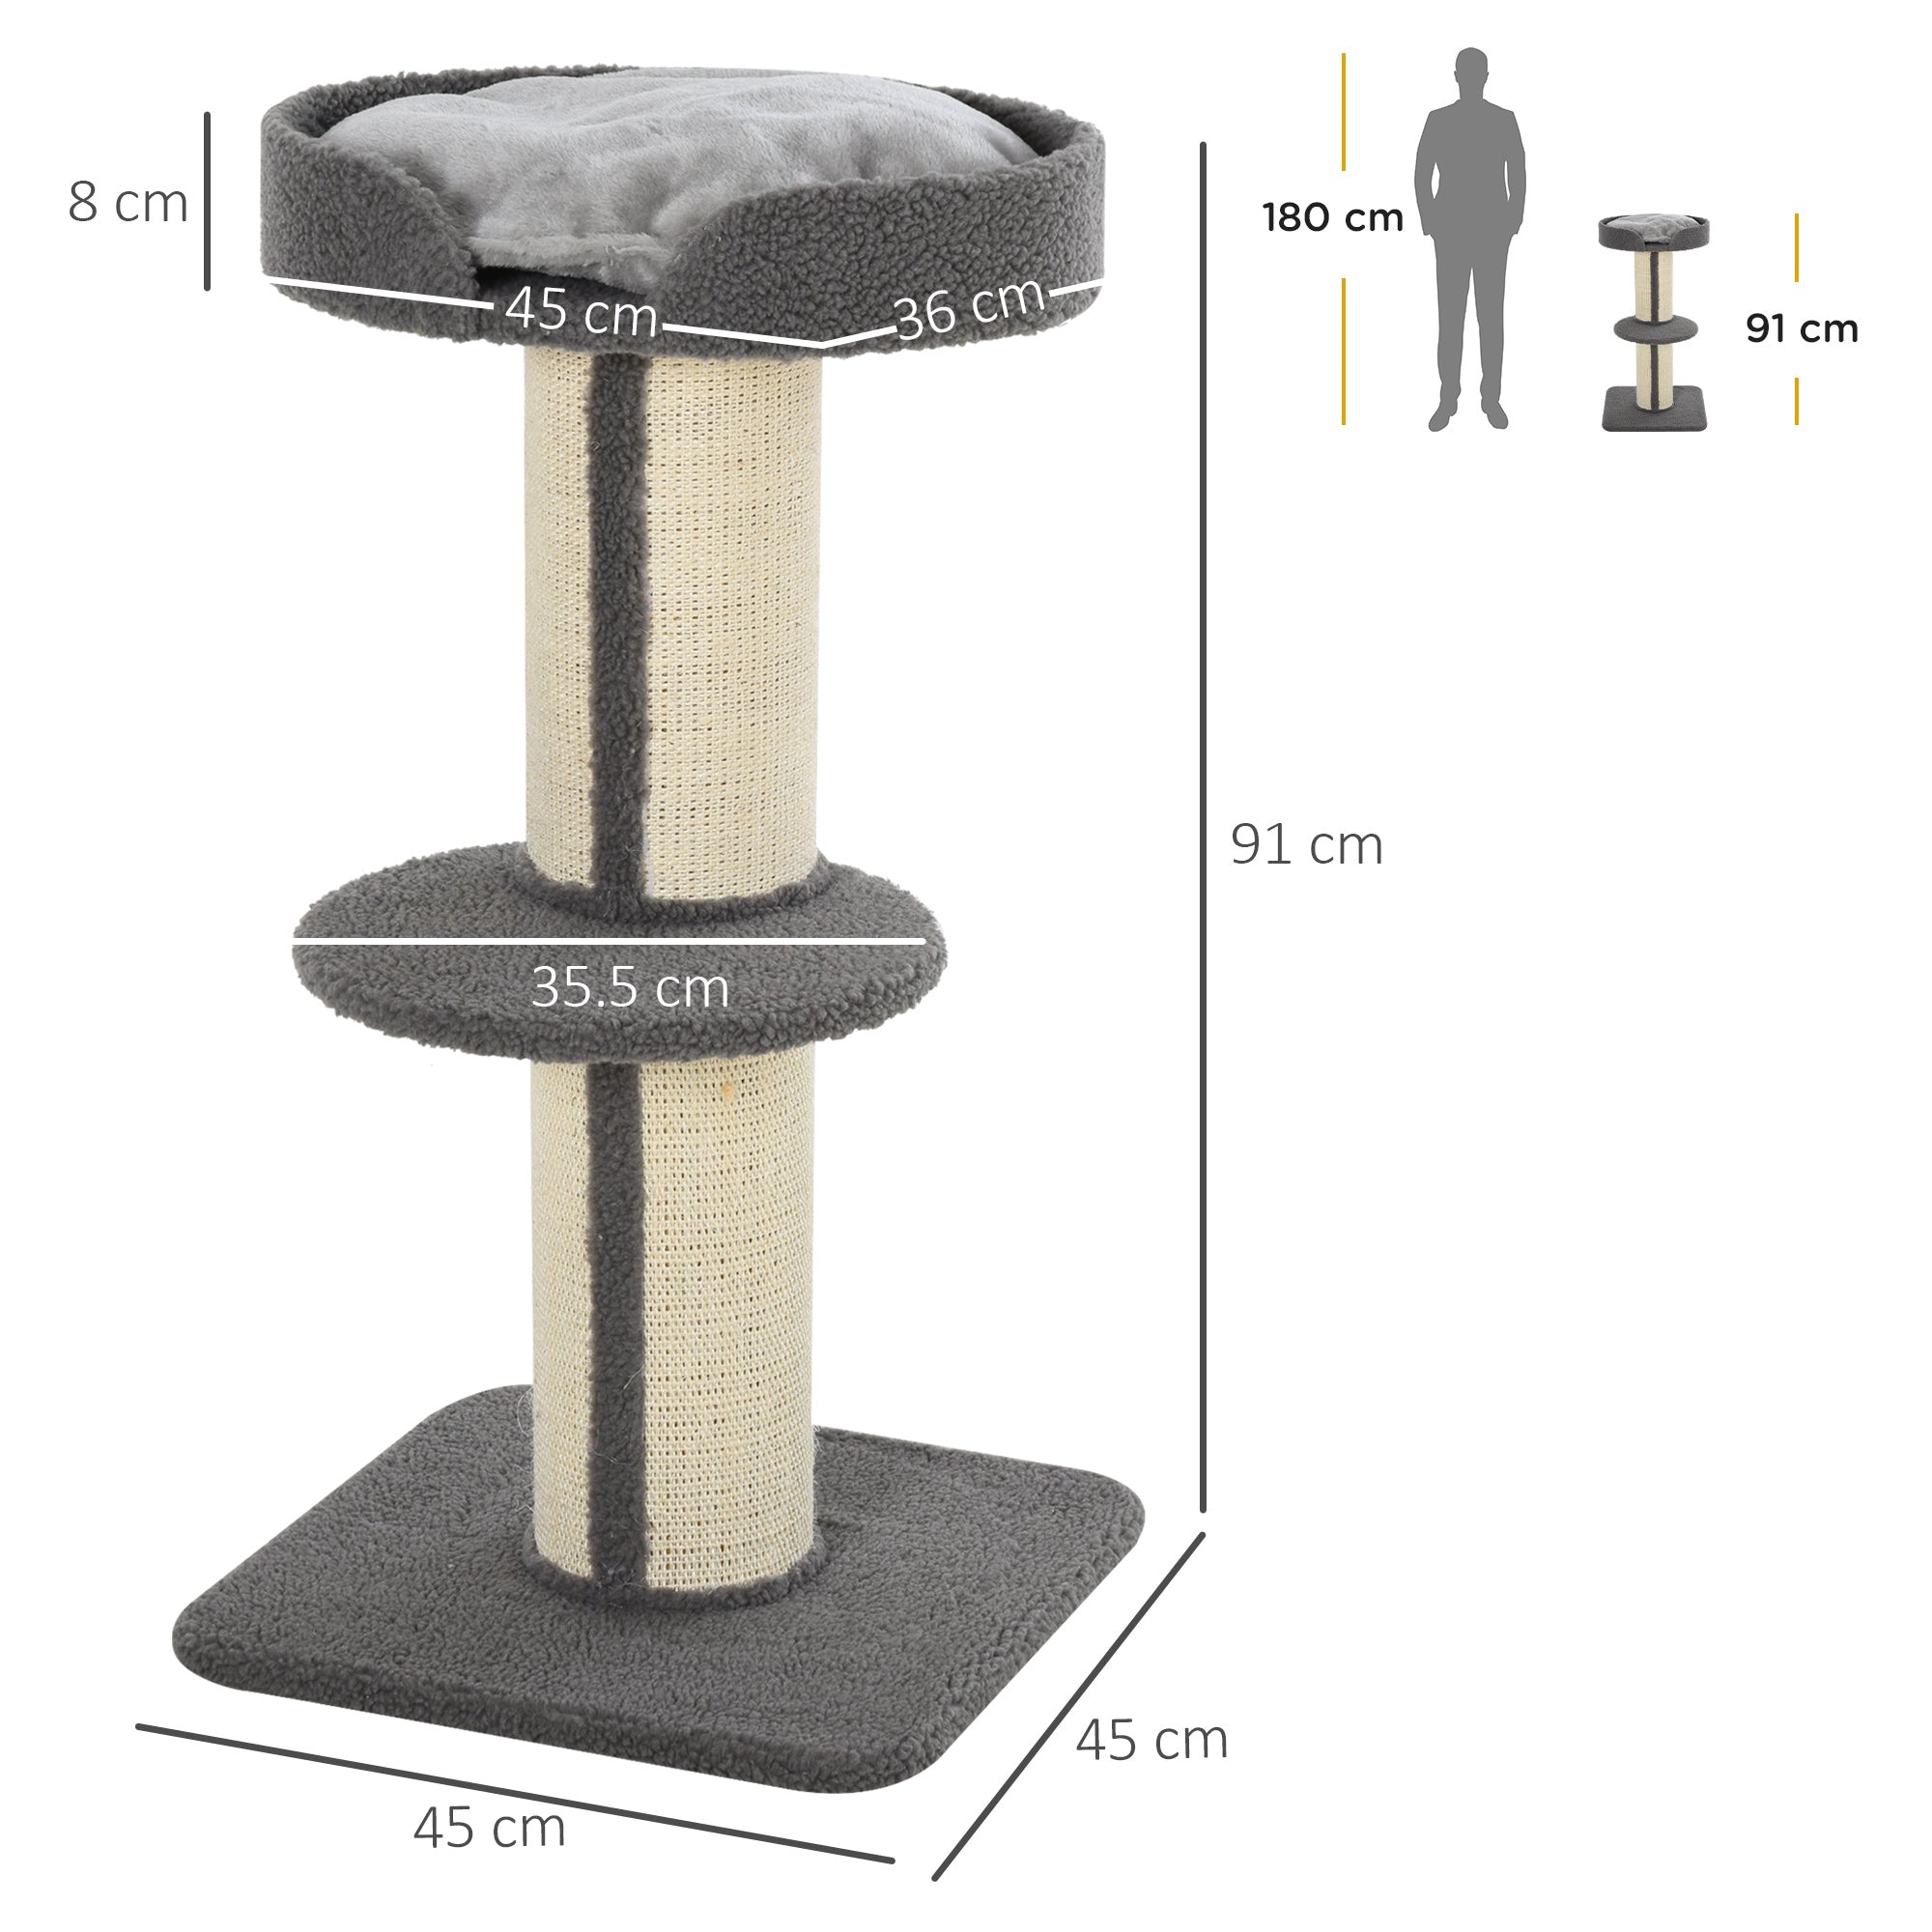 81cm Cat Tree with Sisal Scratching Post, Cat Tower Kitten Activity Center climbing frame with large platform Lamb Cashmere Perch, Grey-2